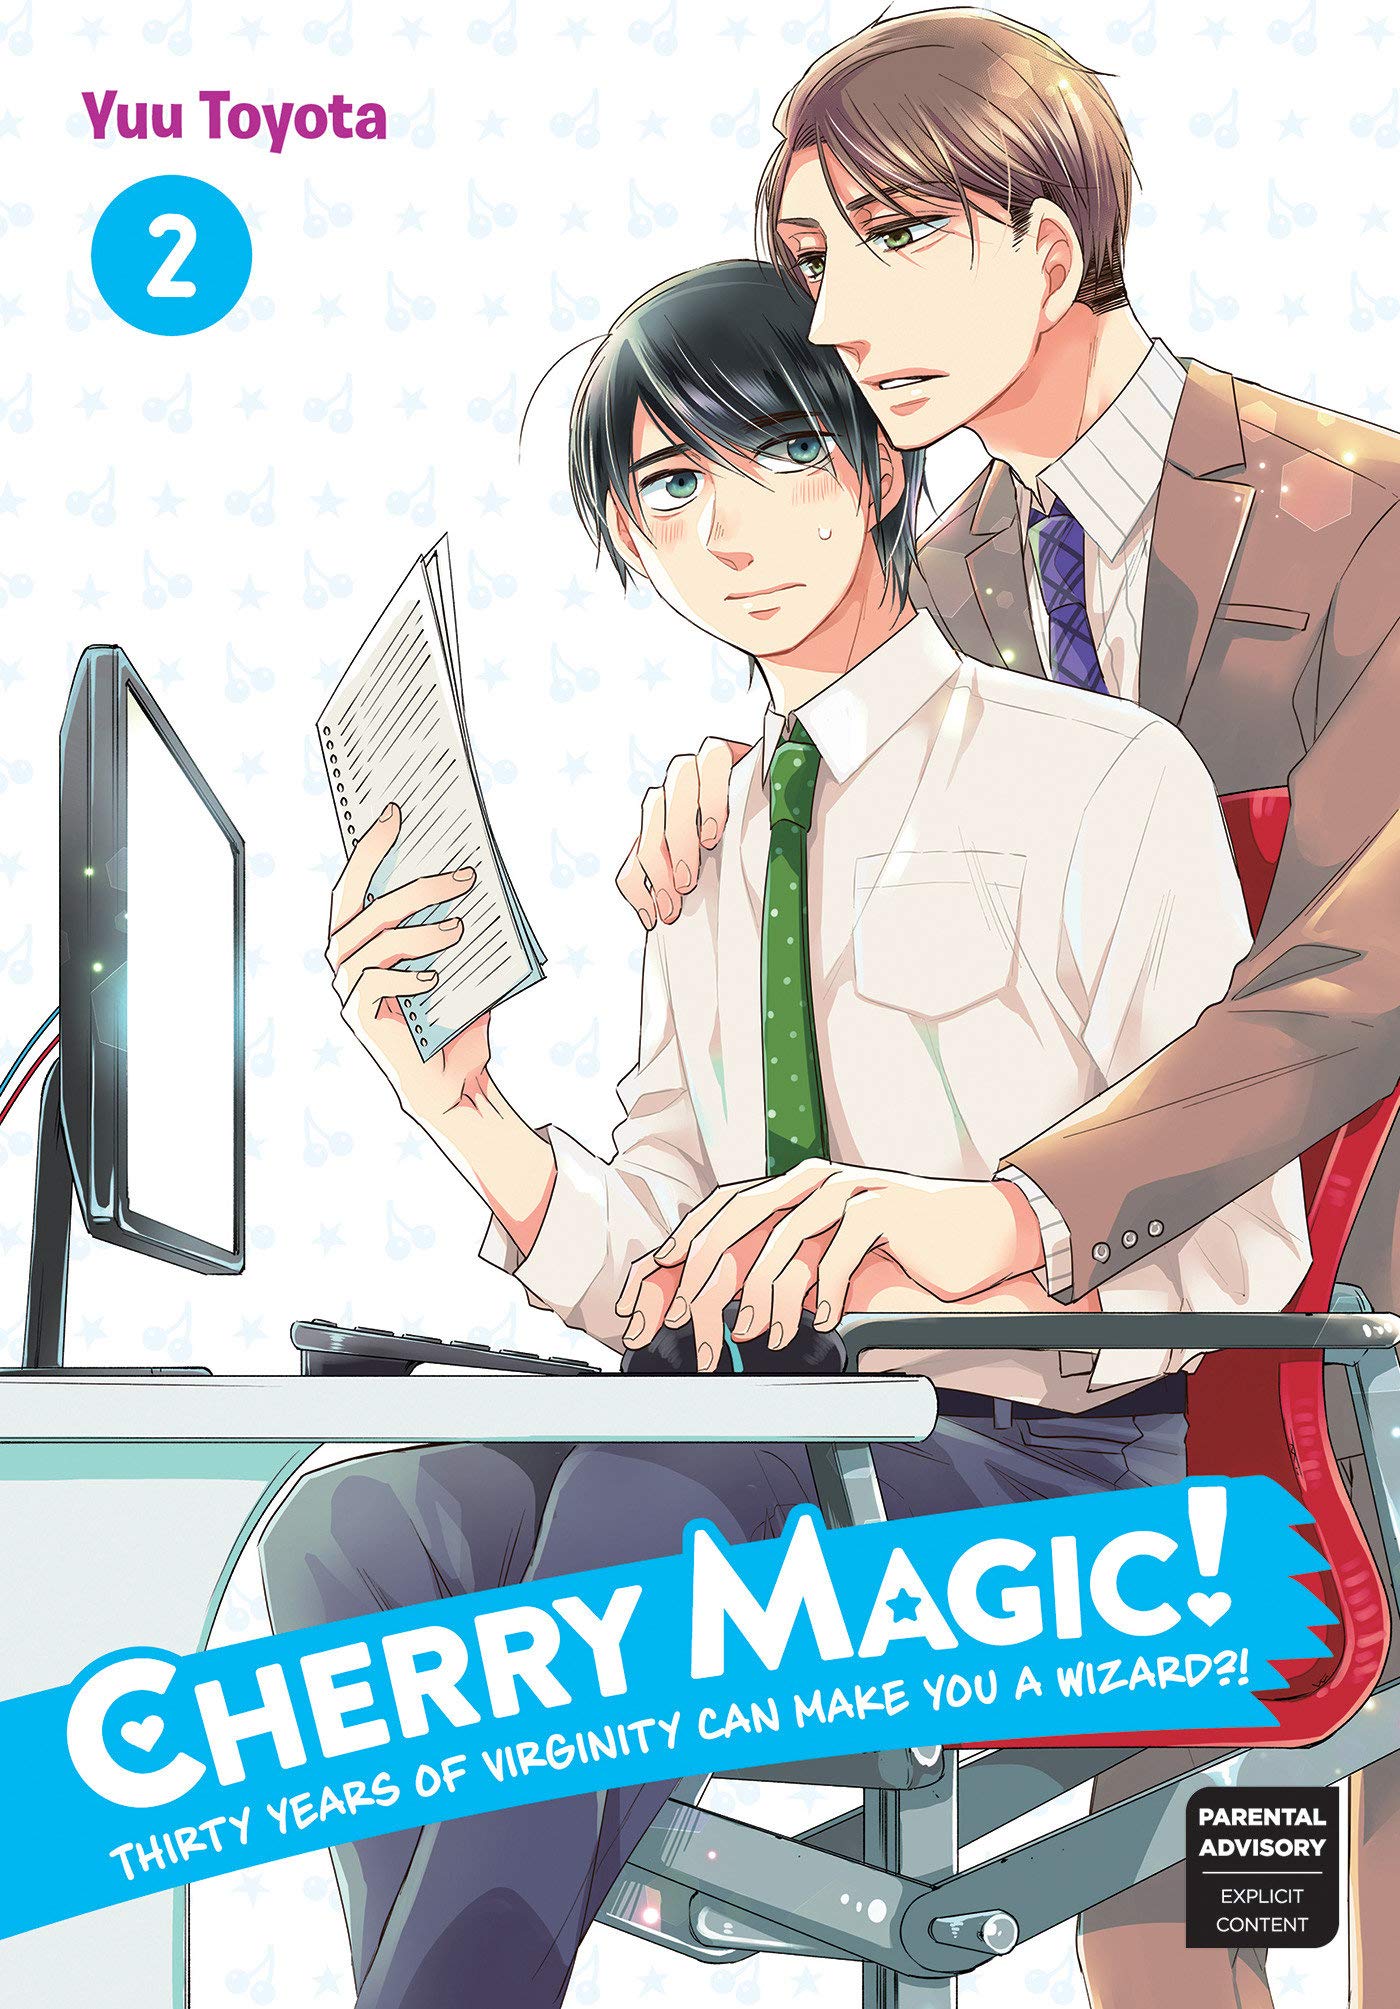 Cherry Magic! Thirty Years Of Virginity Can Make You A Wizard?! - Volume 2